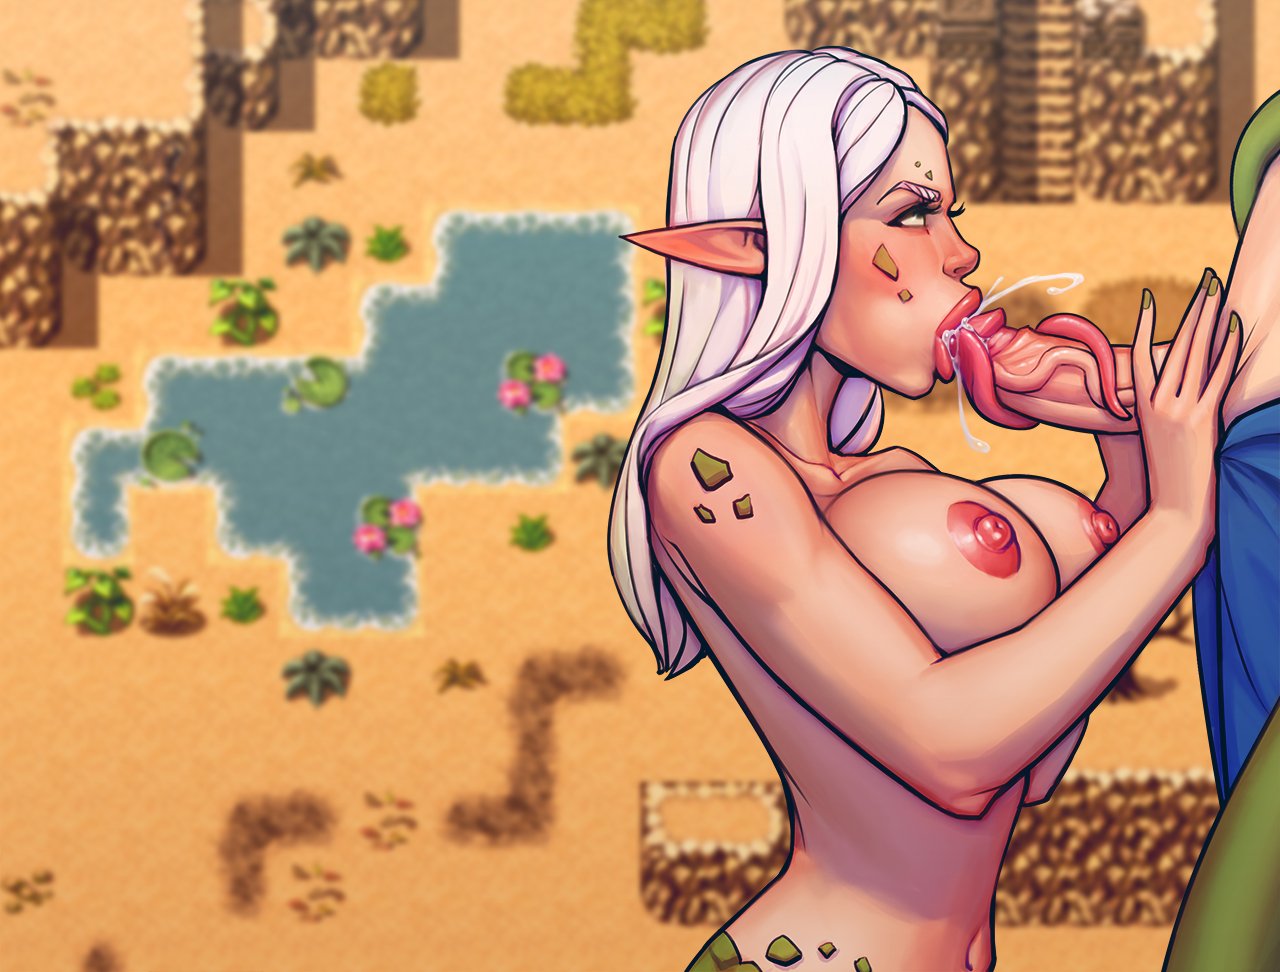 “The cum variant of the snake girl’s blowjob illustration for my game proje...